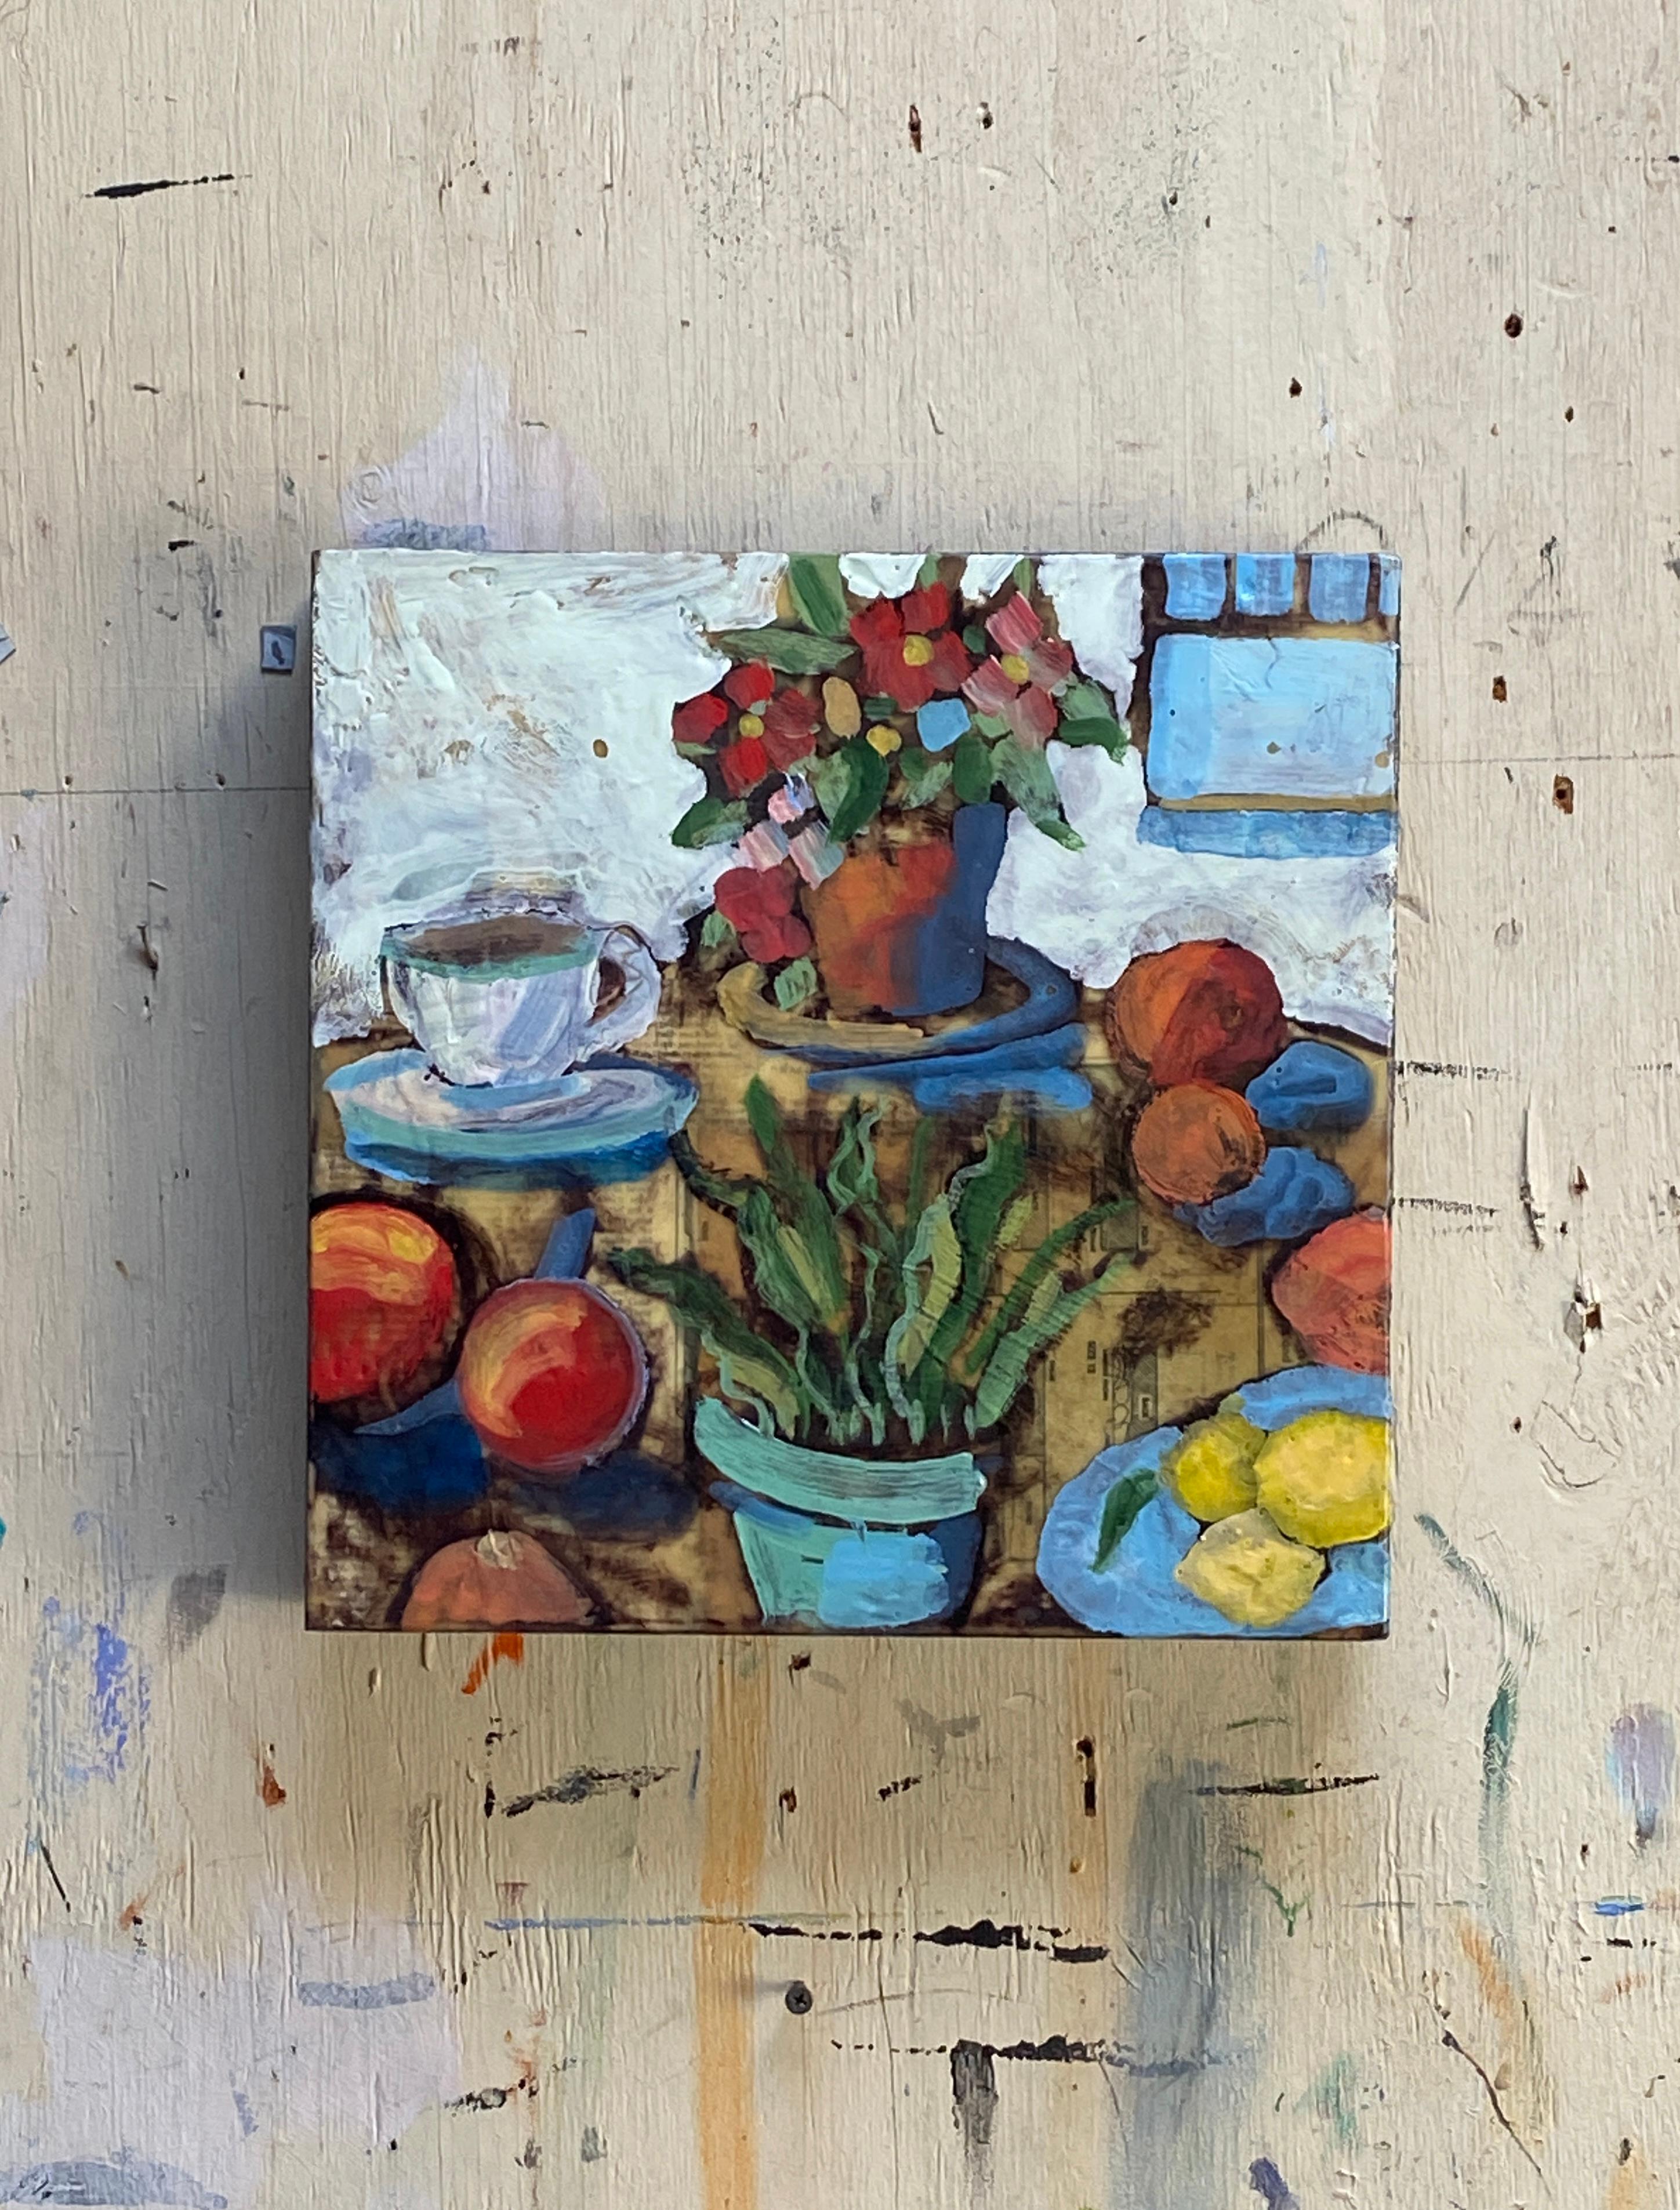 <p>Artist Comments<br>A vibrant encaustic still life featuring a table with fruits, plants, and a cup of coffee by artist James Hartman. Over the years, James has developed his own creative encaustic process. He paints on a collage base and coats it